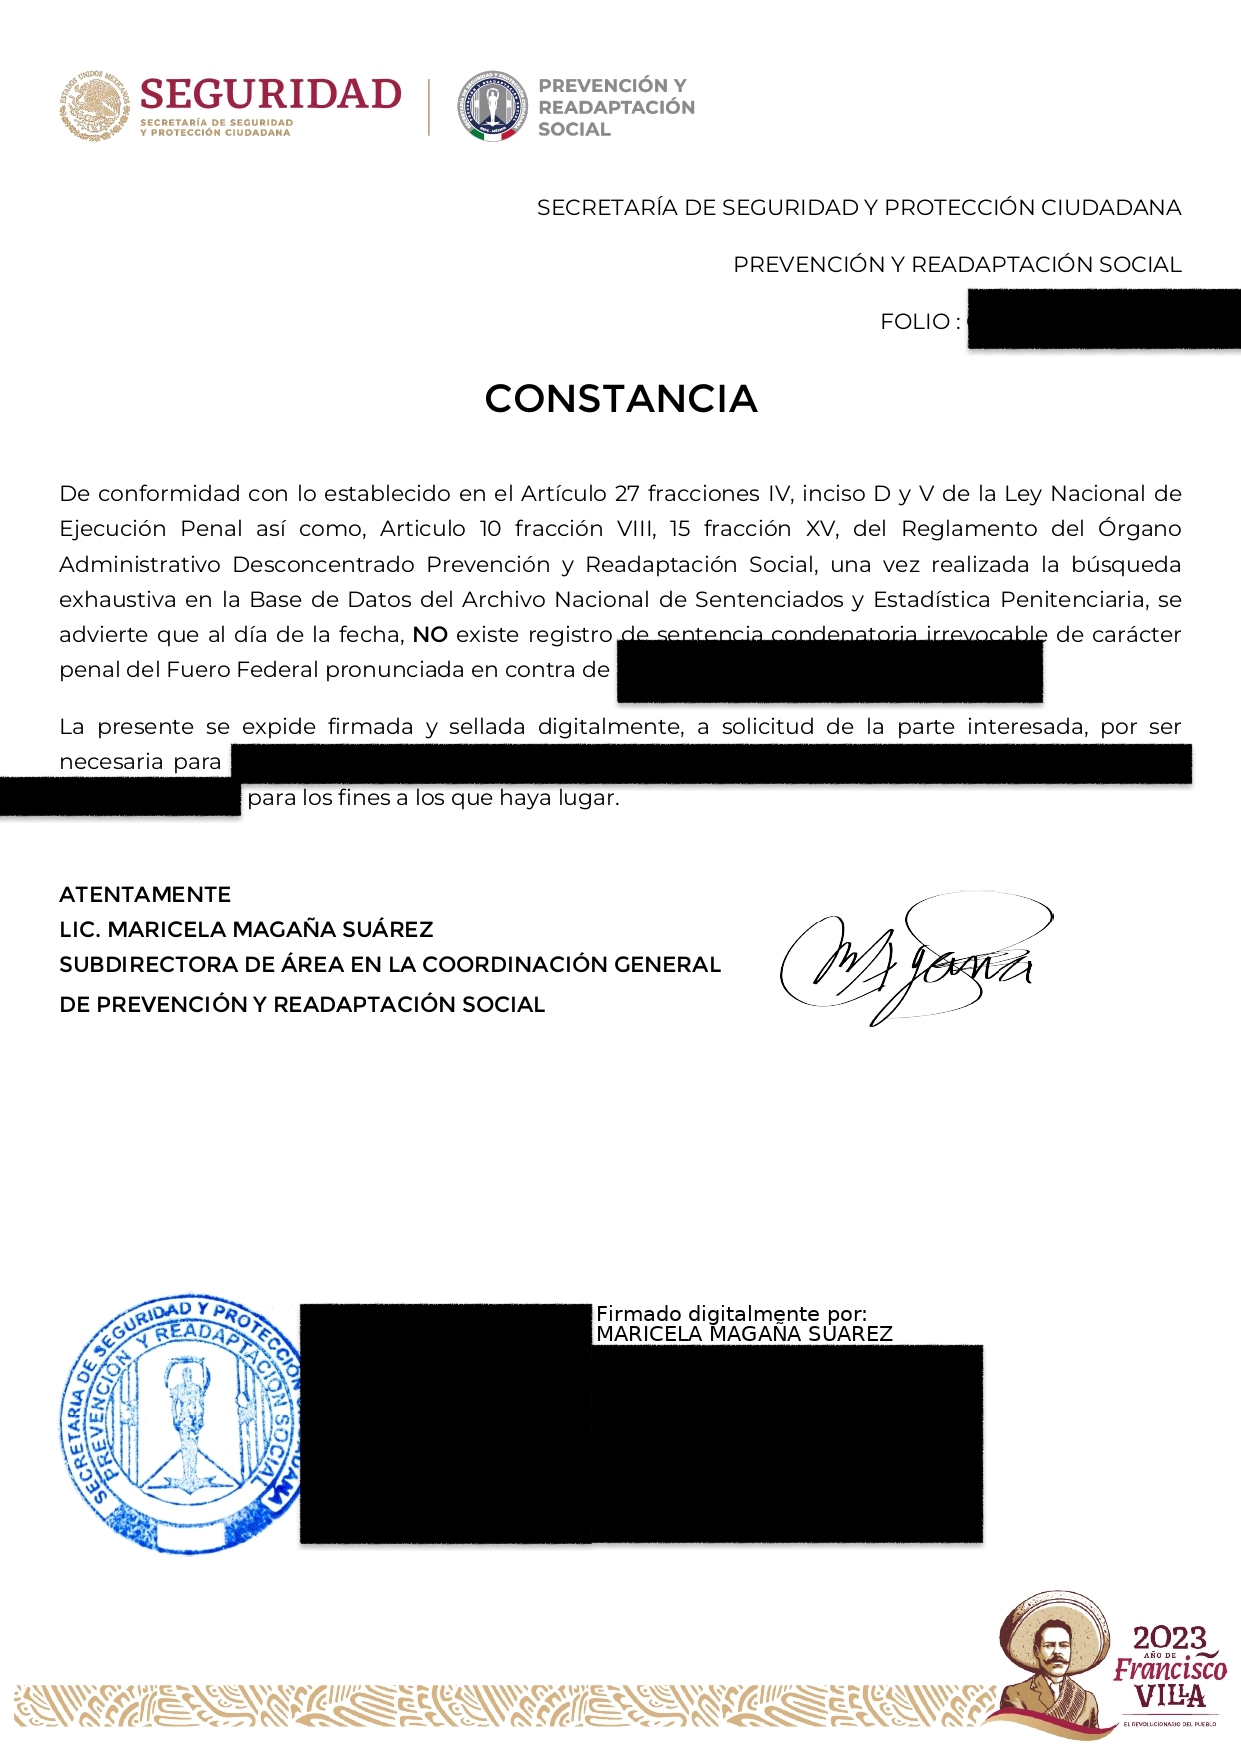 Certified Translation of Mexican Criminal Record from Spanish to English